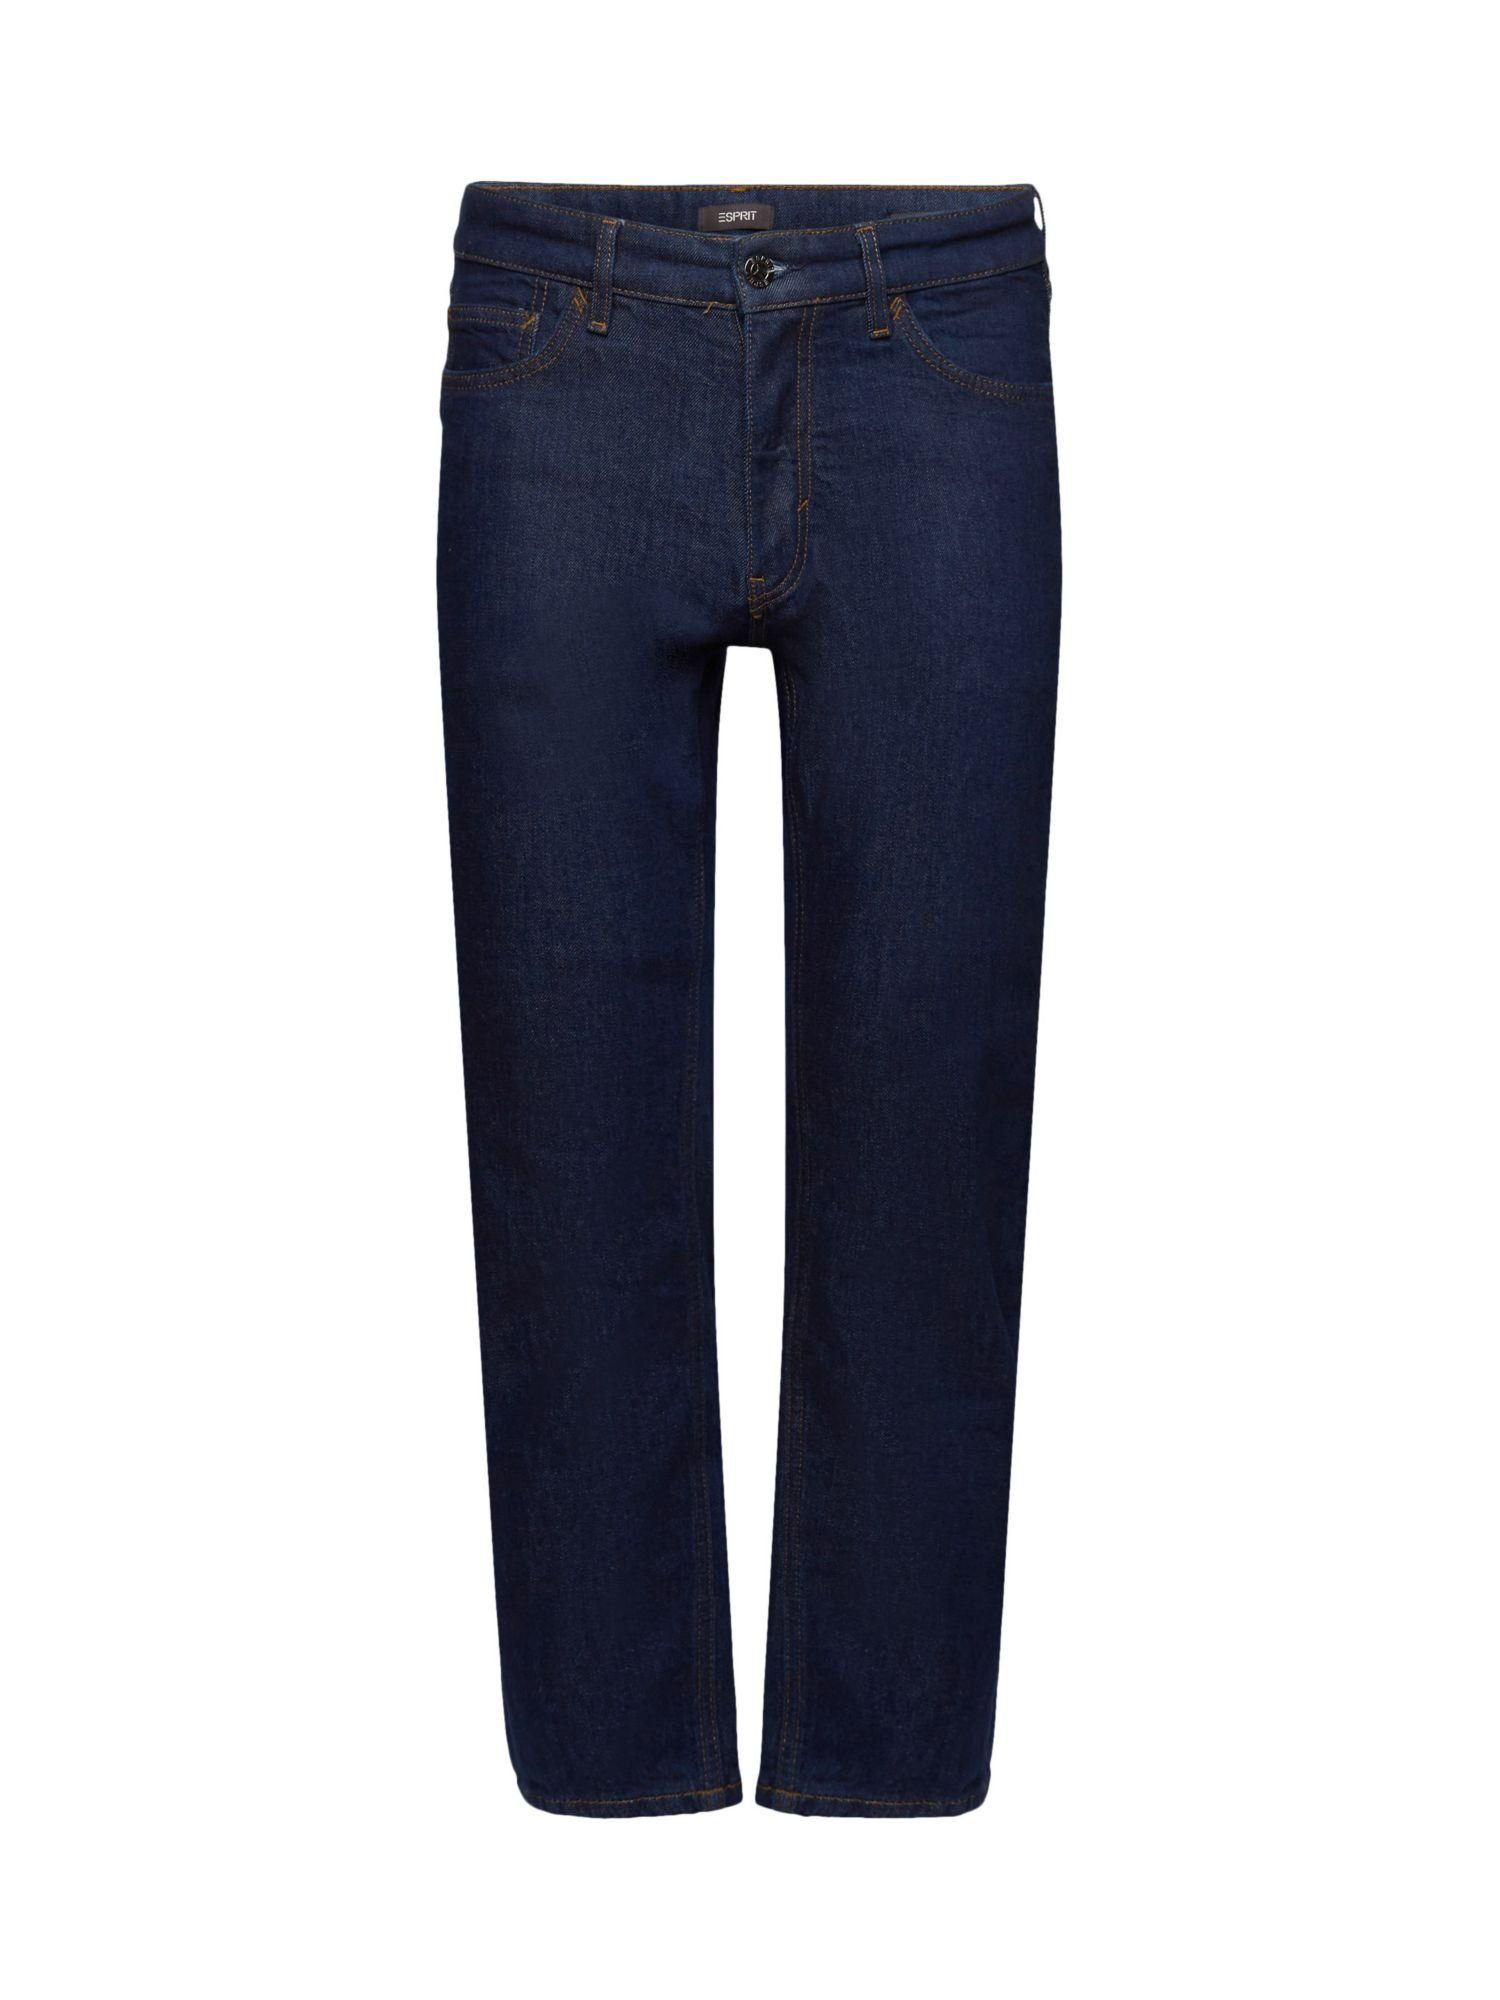 RINSE Esprit Slim-fit-Jeans Relaxed-Fit-Jeans BLUE Collection